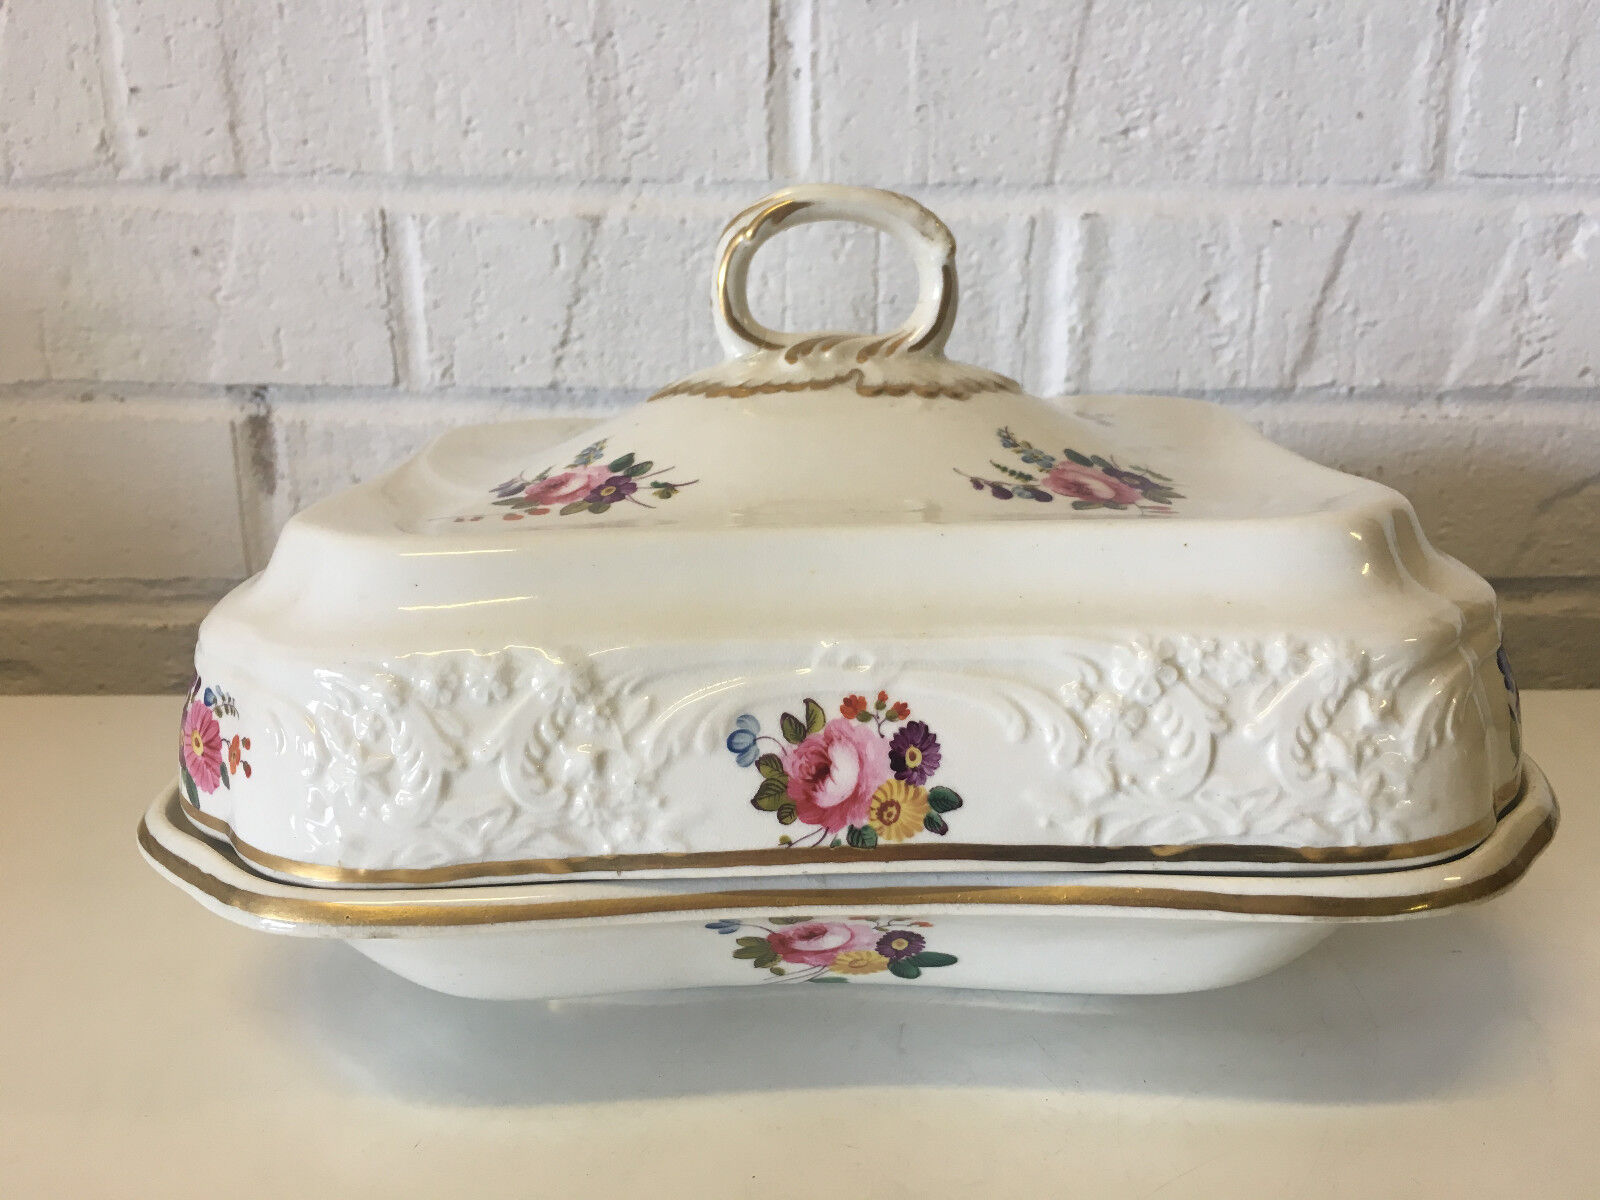 Antique 18th / 19th Century English Derby Porcelain Covered Dish w/ Floral Dec.